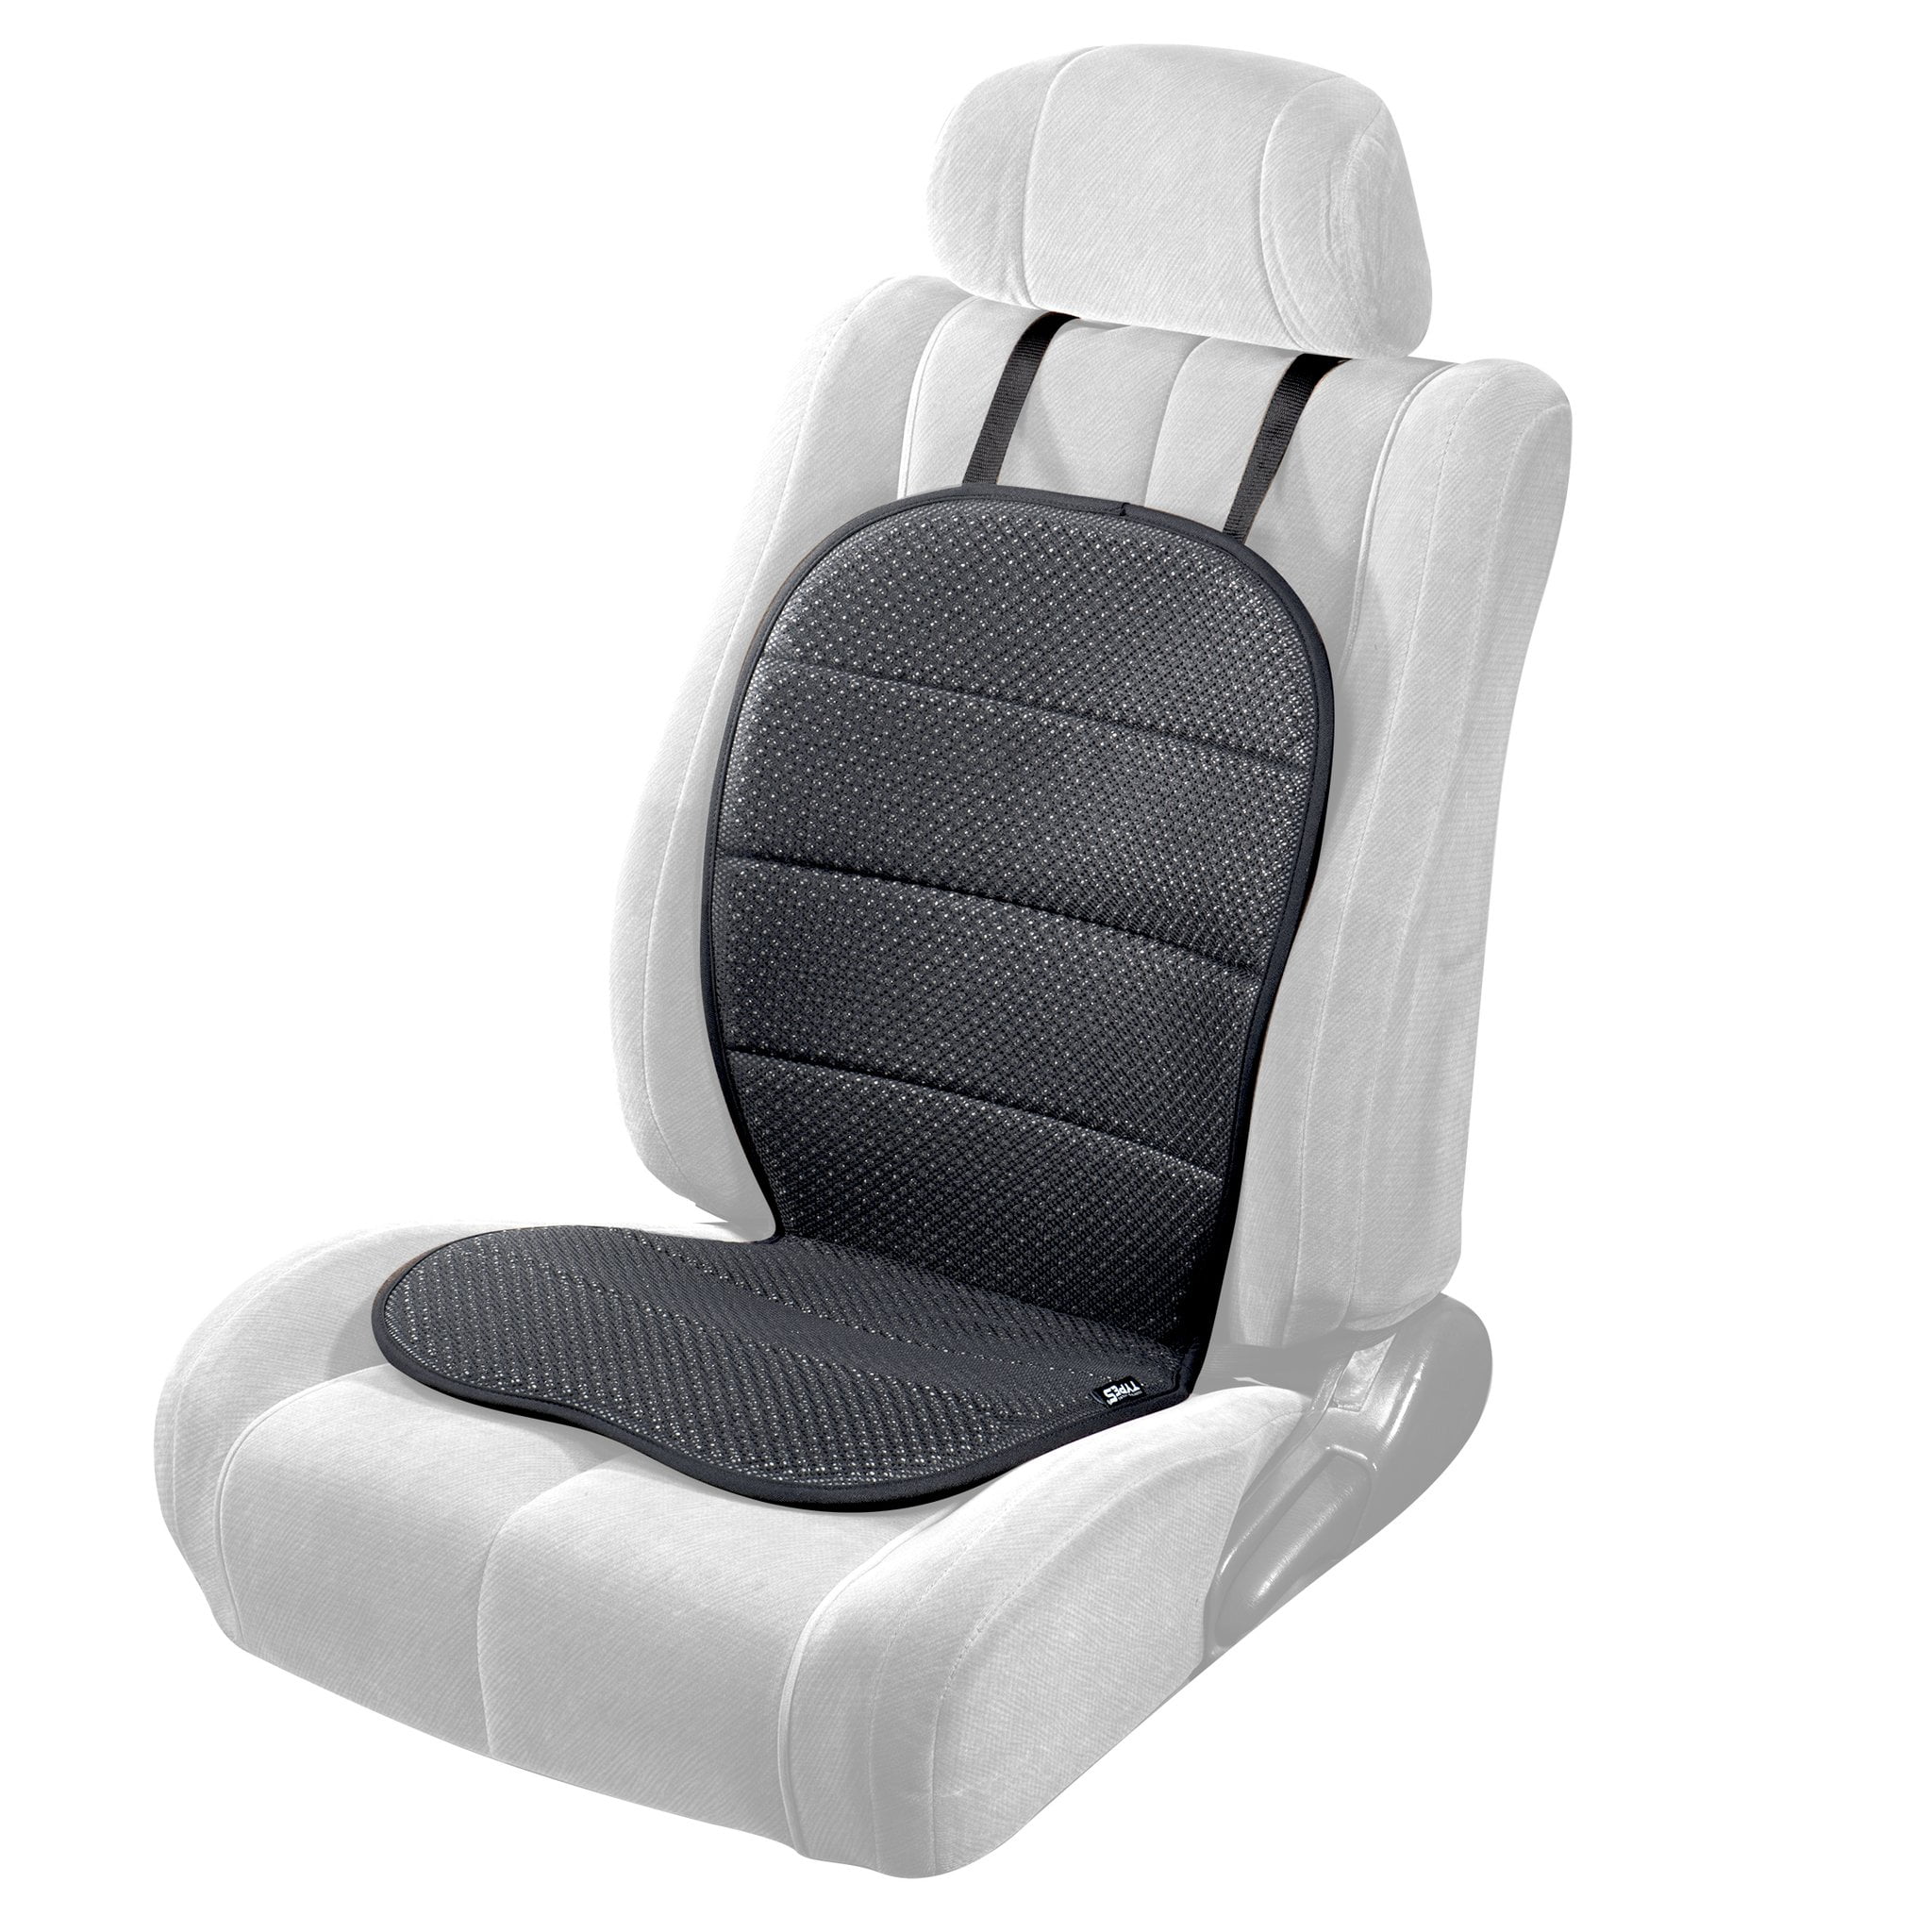 TYPE S Universal Fit Air Flow Seat Pad Seat Cushion Seat Cover, Black,  Multi-Layer Air Flow, 